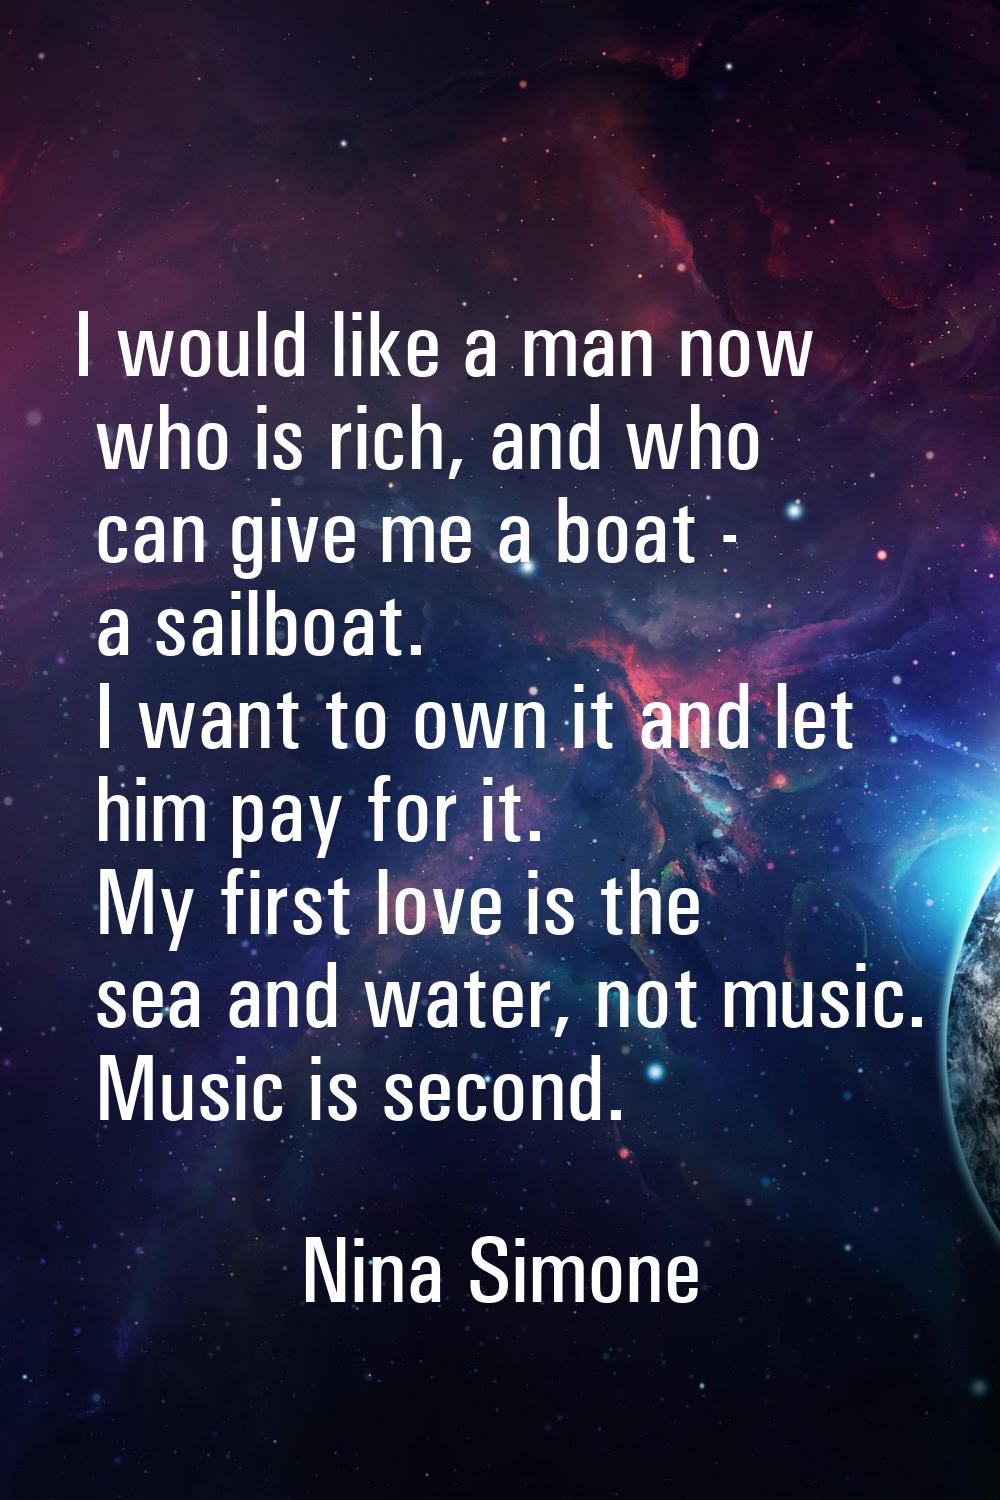 I would like a man now who is rich, and who can give me a boat - a sailboat. I want to own it and l